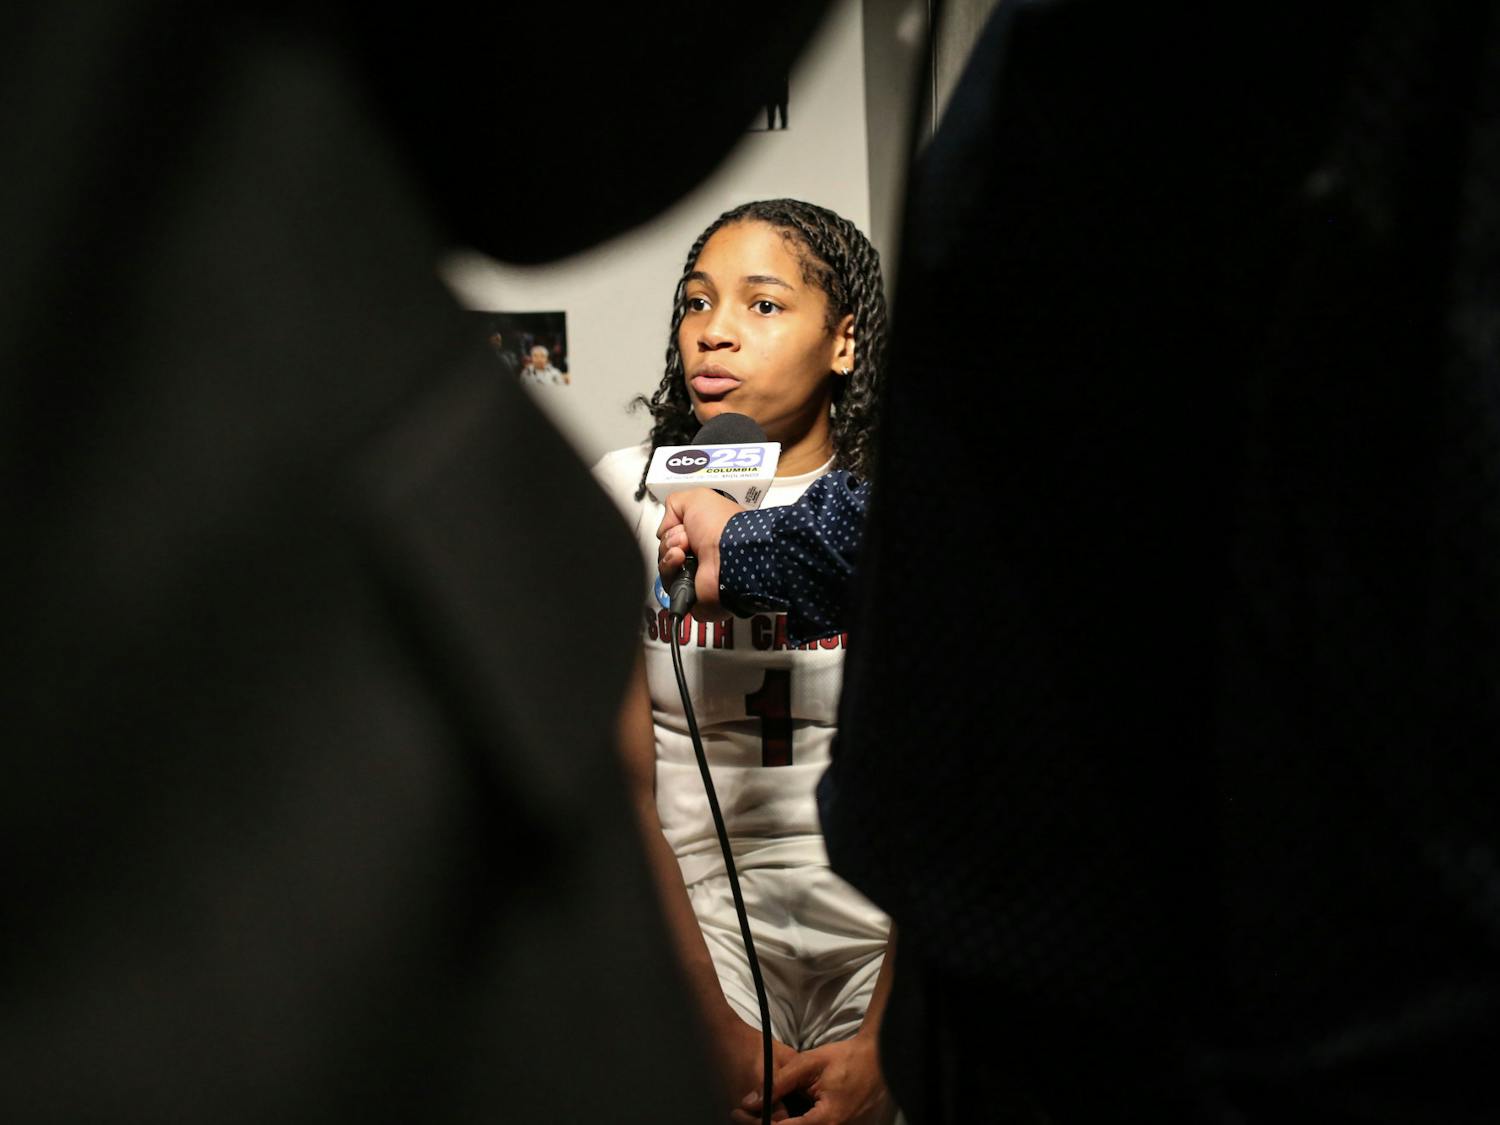 Senior guard Zia Cooke is interviewed by ABC News 25 in the locker room following South Carolina’s win against South Florida in round two of the NCAA tournament at Colonial Life Arena on March 19, 2023. The Gamecocks defeated the Bulls 76-45.